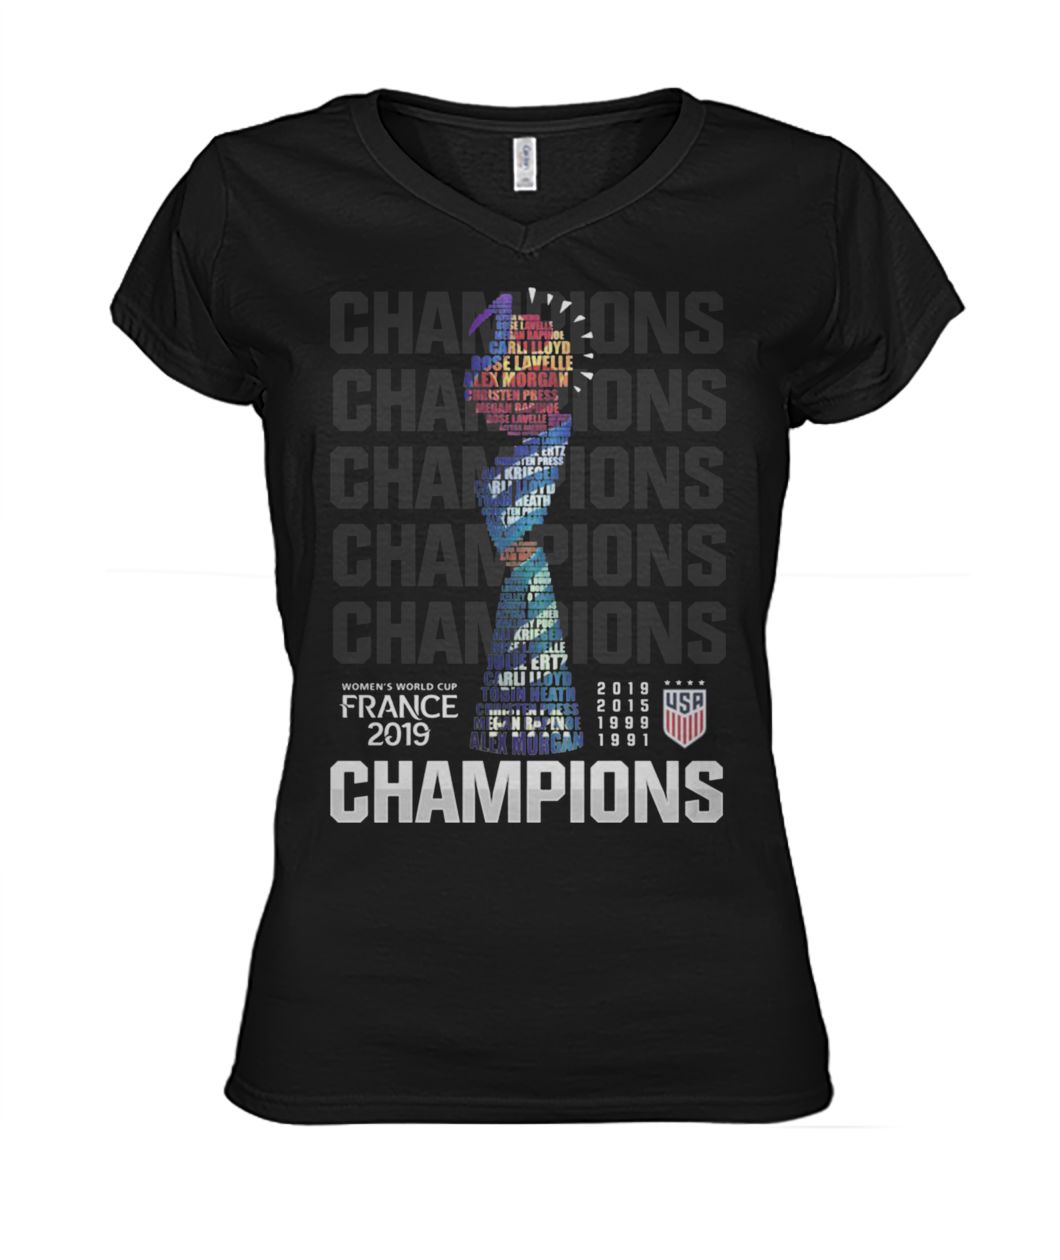 Champions USA women's world cup france 2019 women's v-neck